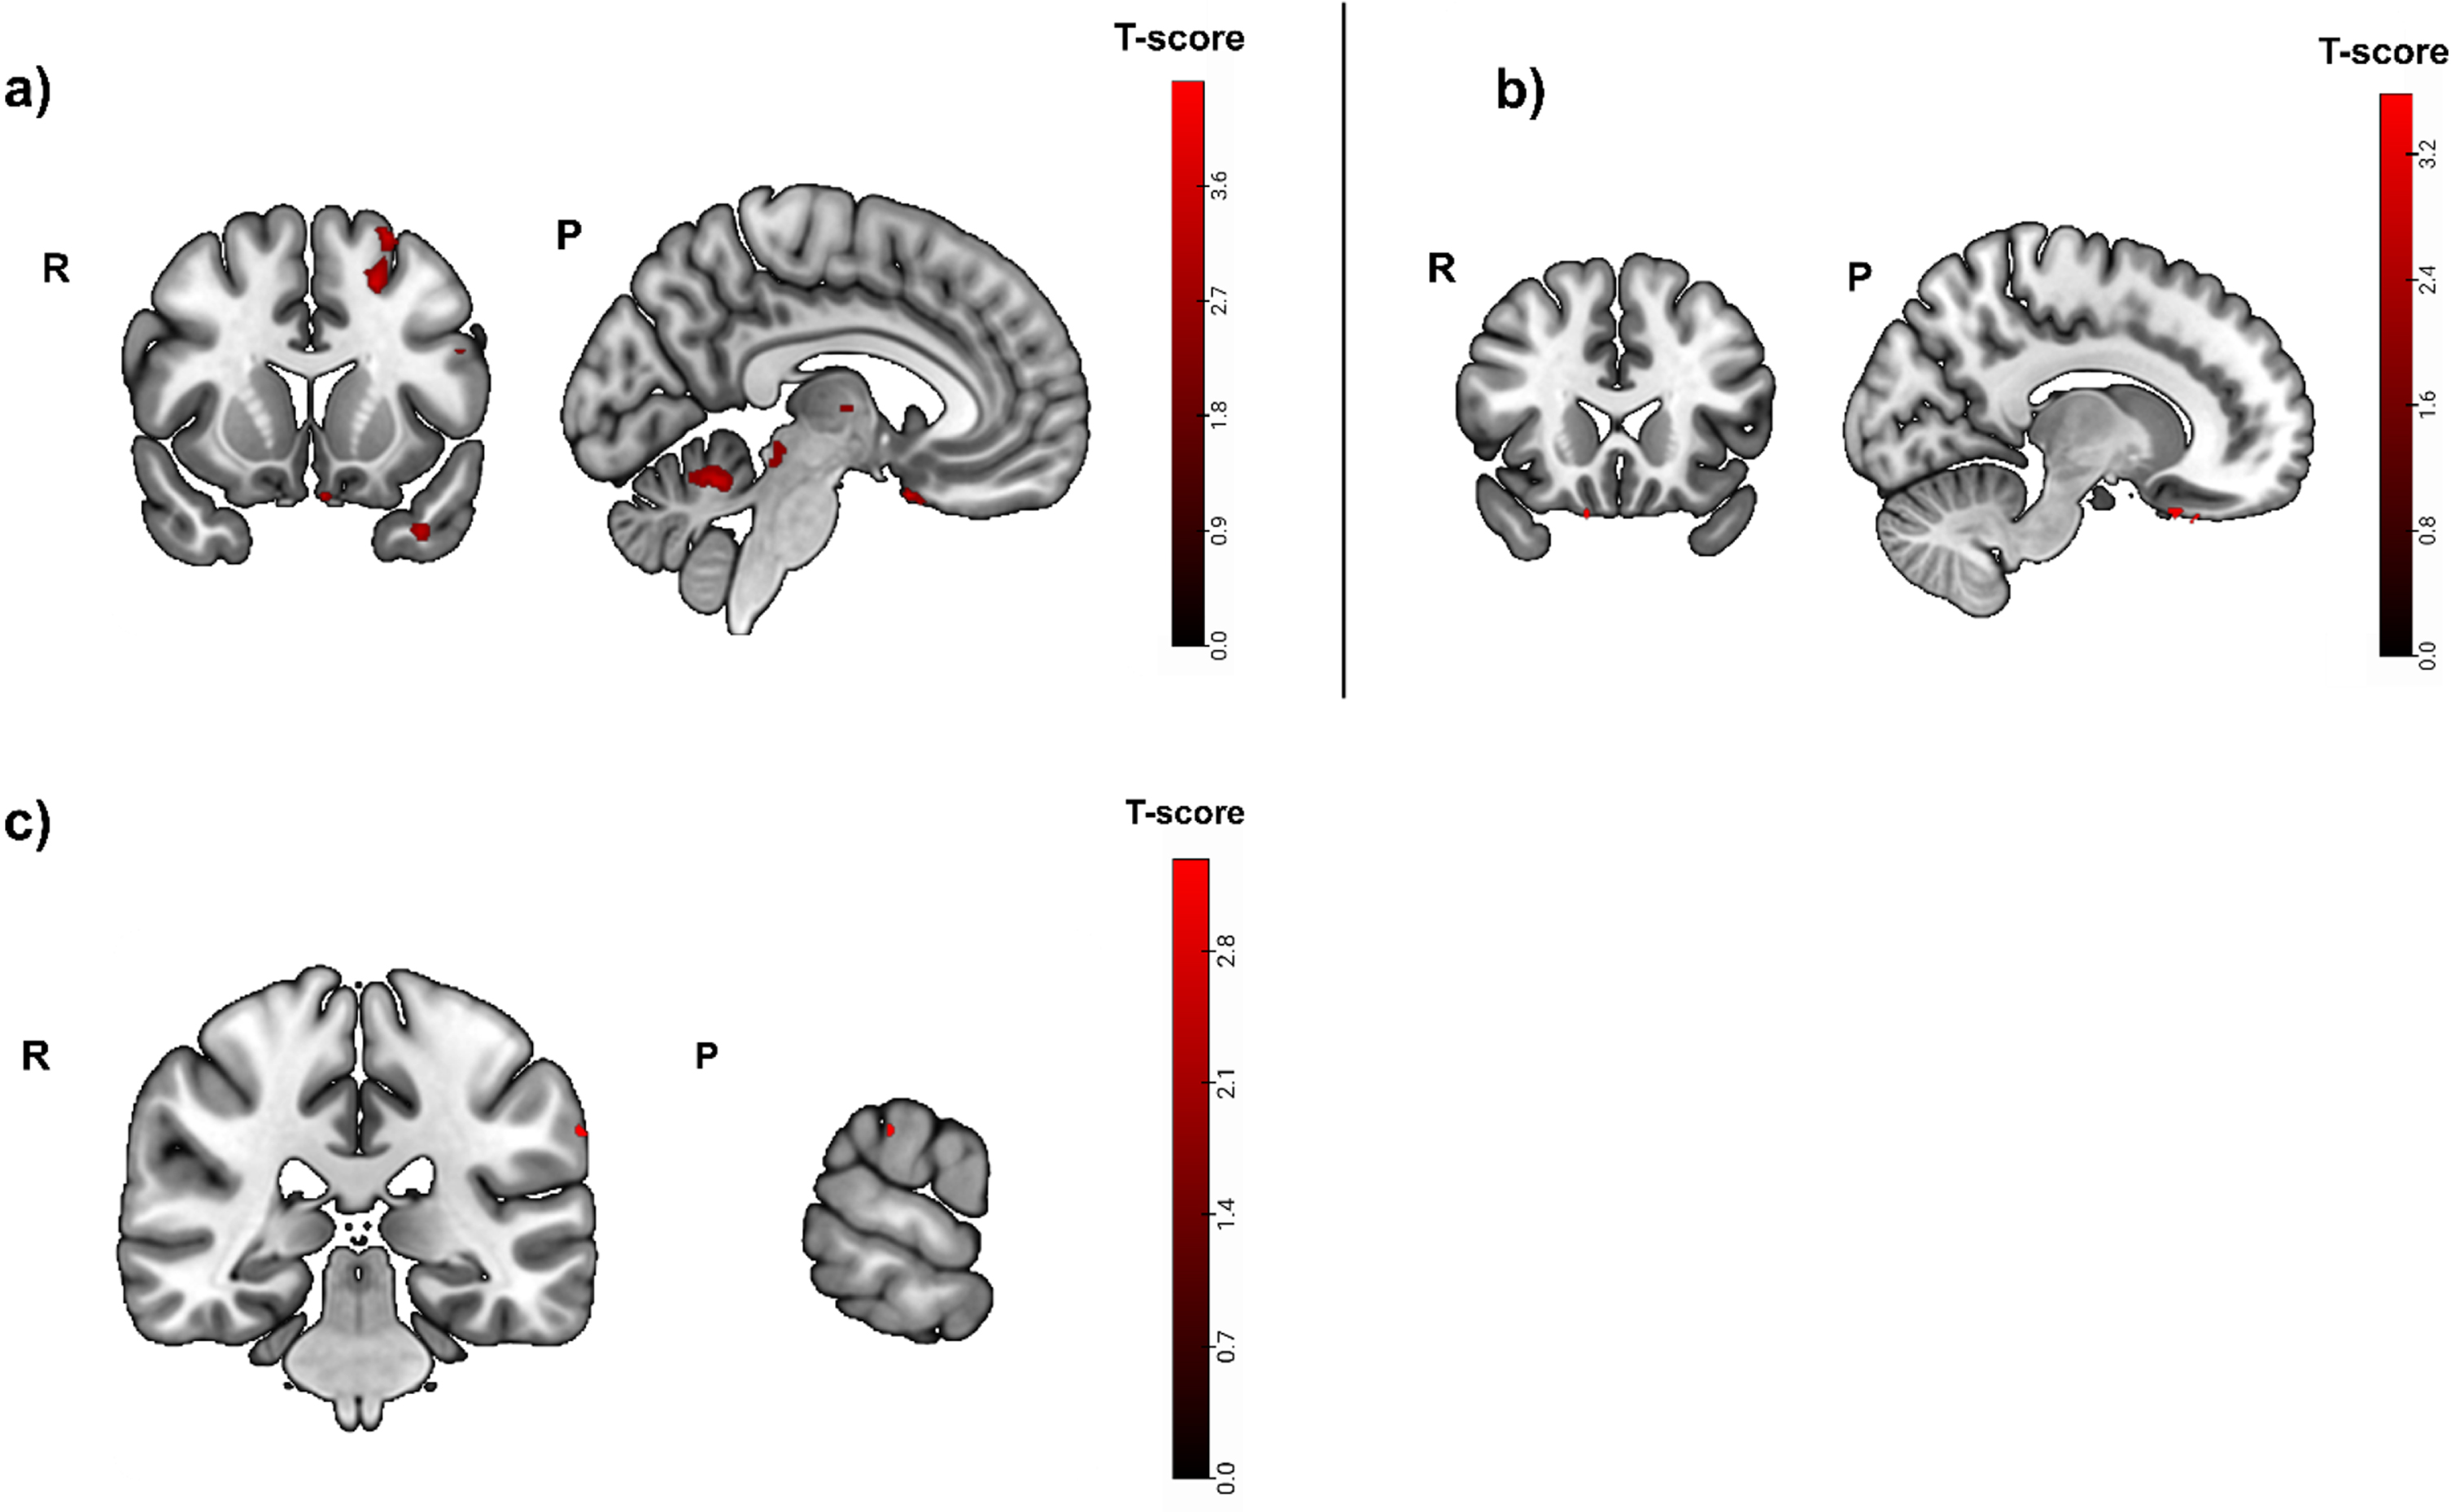 Greater activity related to greater hippocampal atrophy in the spatial abilities task ([translation+rotation]>luminance conditions contrast, puncorrected < 0.01), used as mask. Activity was detected in the left subcallosal area, the cerebellar vermal lobules I-V and the left cerebral white matter/superior frontal gyrus. b) Greater activity related to high spatial abilities task accuracy (before masking) was located in the right medial orbital gyrus and the left supramarginal gyrus (puncorrected < 0.001). c) After inclusive masking a significant effect in the left supramarginal gyrus was detected (puncorrected < 0.001). R, right; P, posterior.